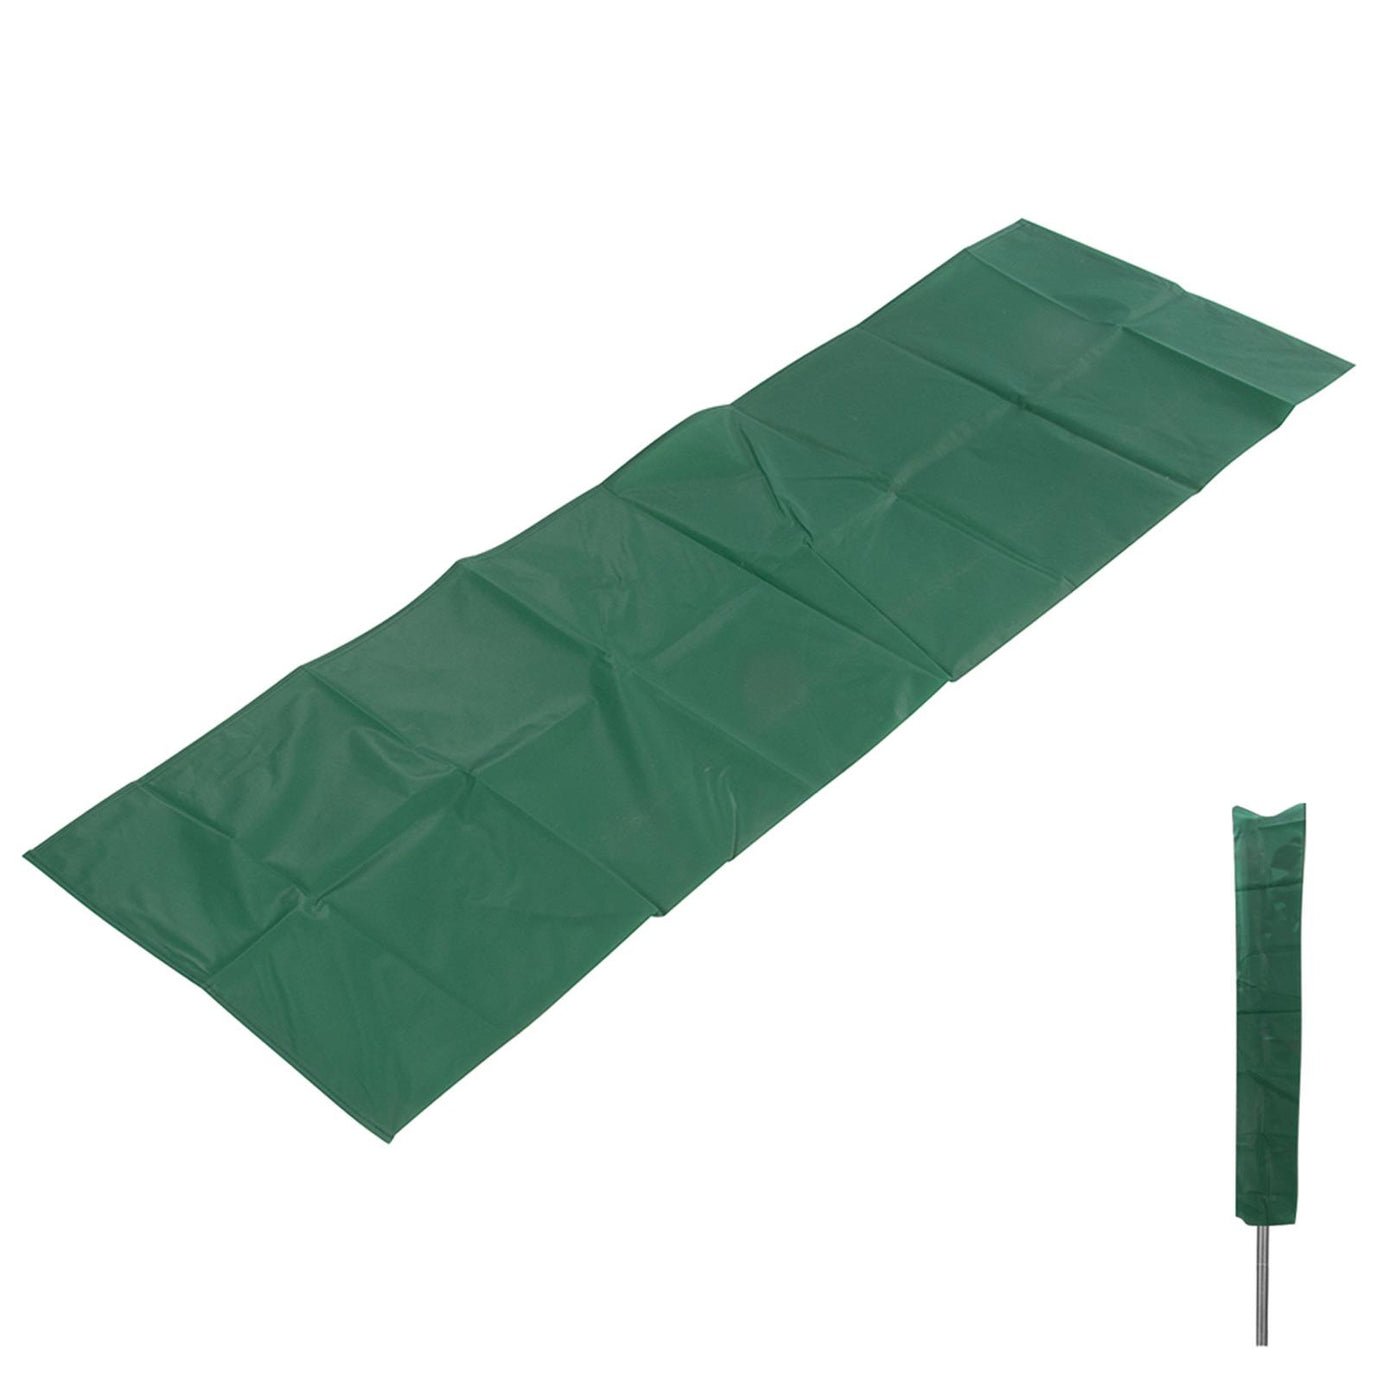 Rotary Line Cover 400 X 1500mm Strong, Durable, Polyethylene Cover New